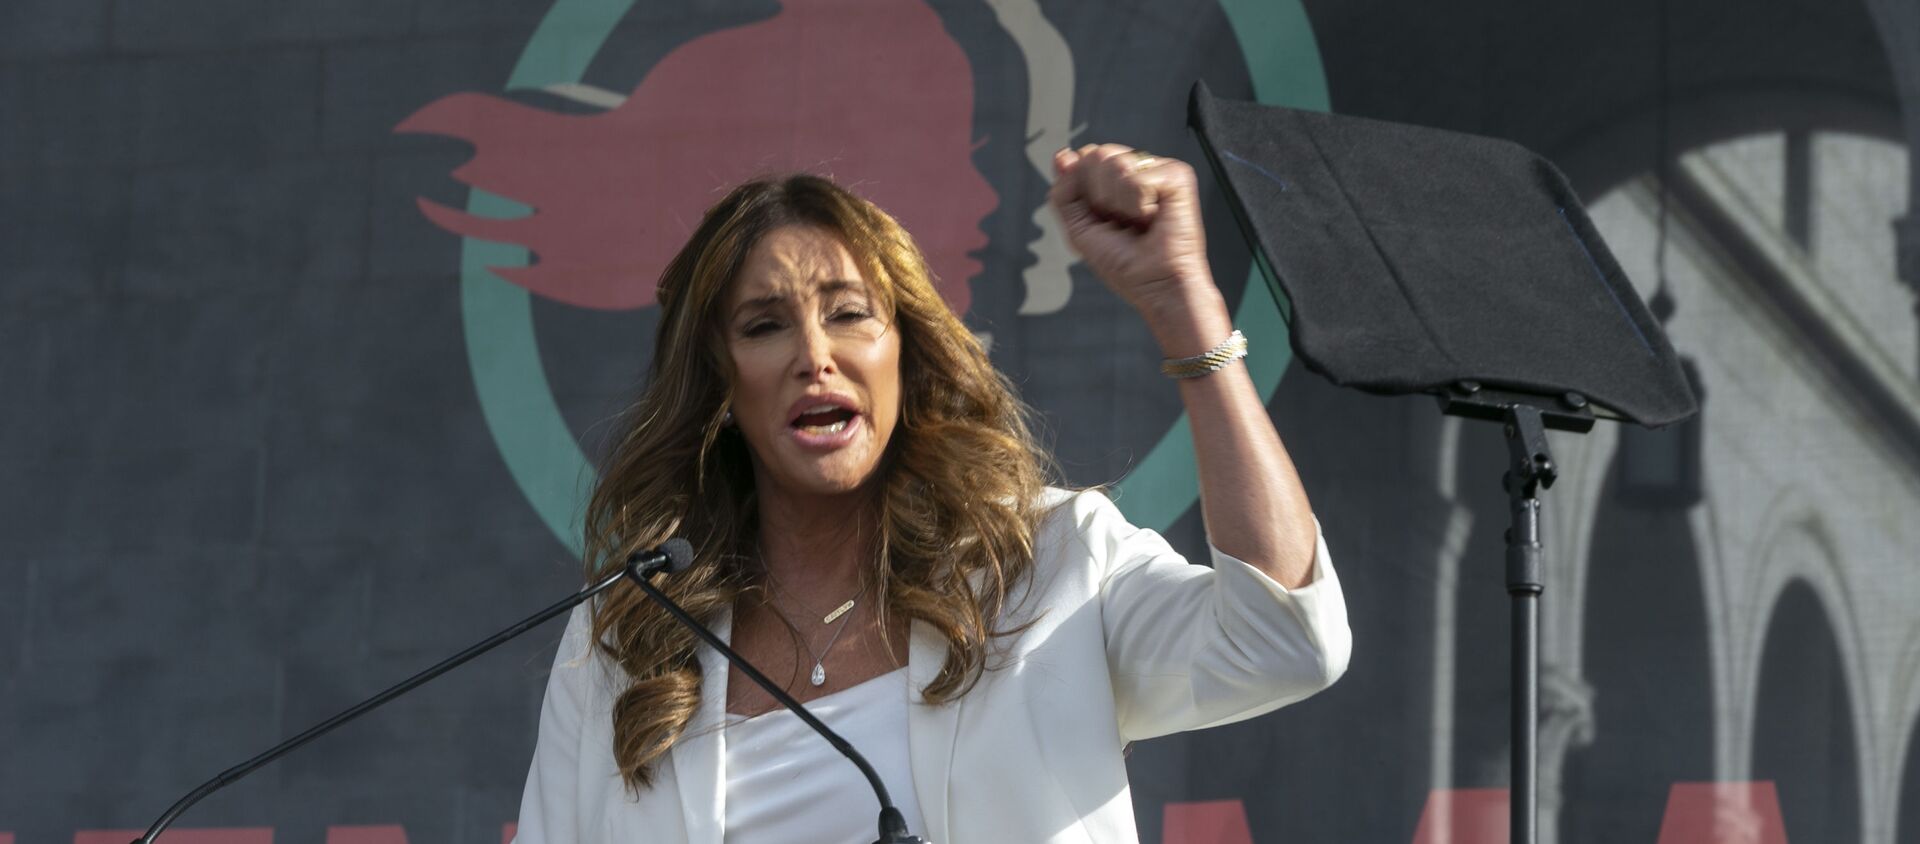 Transgender rights activist Caitlyn Jenner speaks at the 4th Women's March in Los Angeles on Saturday, Jan. 18, 2020. Thousands gathered in cities across the country Saturday as part of the nationwide Women's March rallies focused on issues such as climate change, pay equity, reproductive rights and immigration. (AP Photo/Damian Dovarganes) - Sputnik International, 1920, 07.04.2021